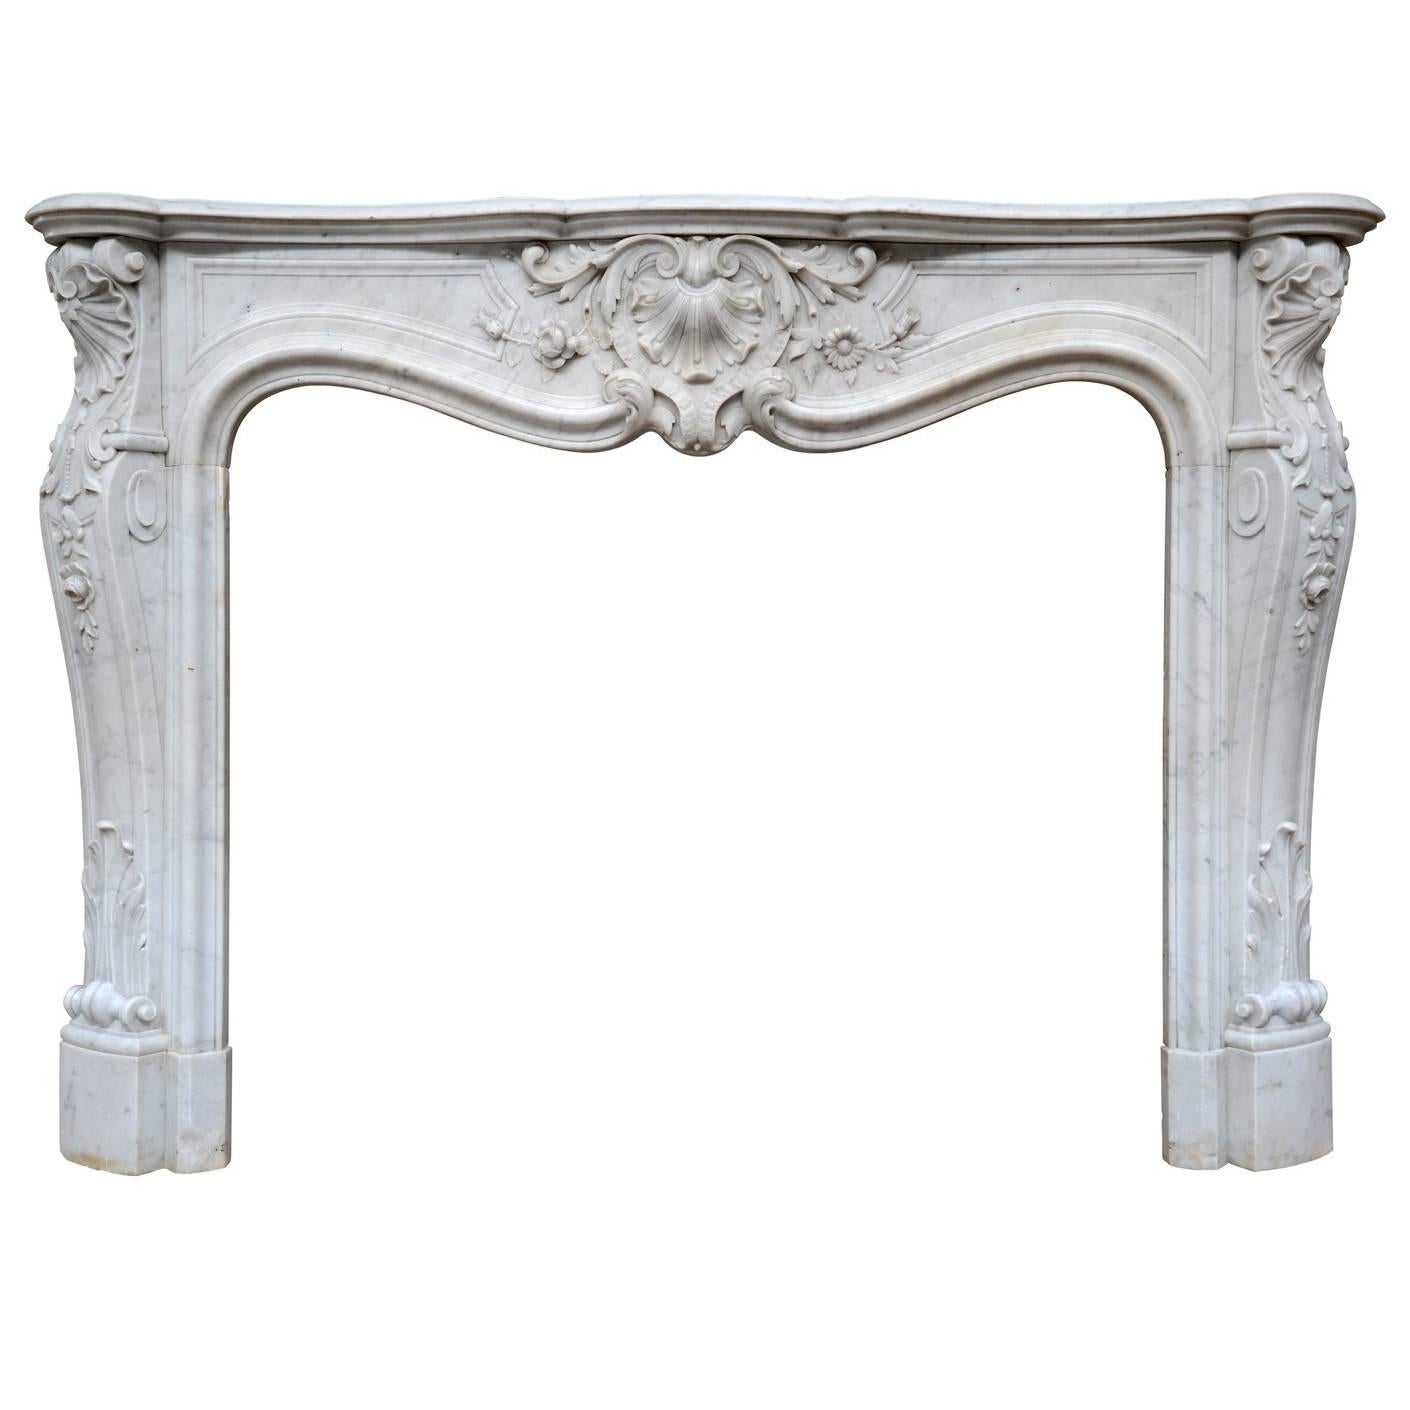 French Louis XV Style Carrara Marble Fireplace, 19th Century